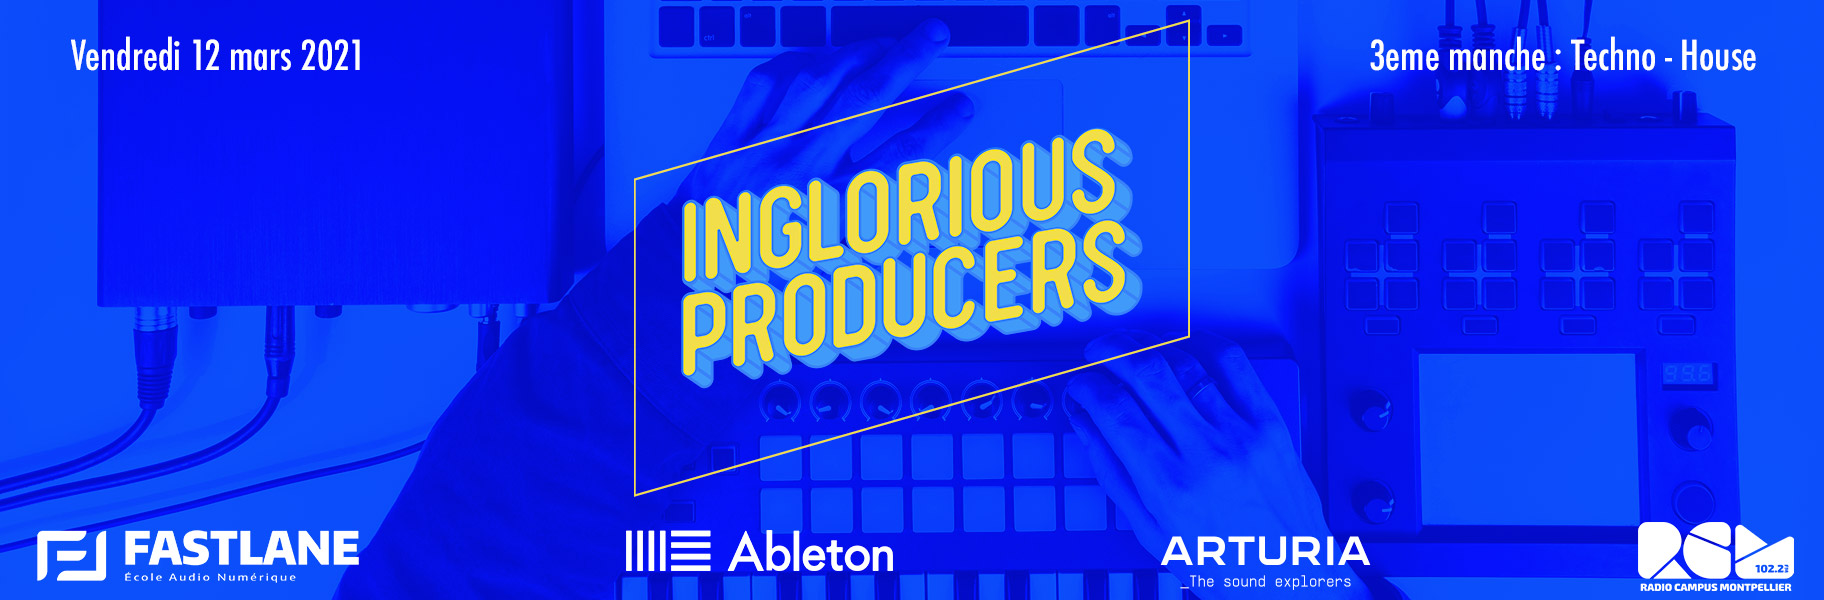 Inglorious Producers-3eme manche